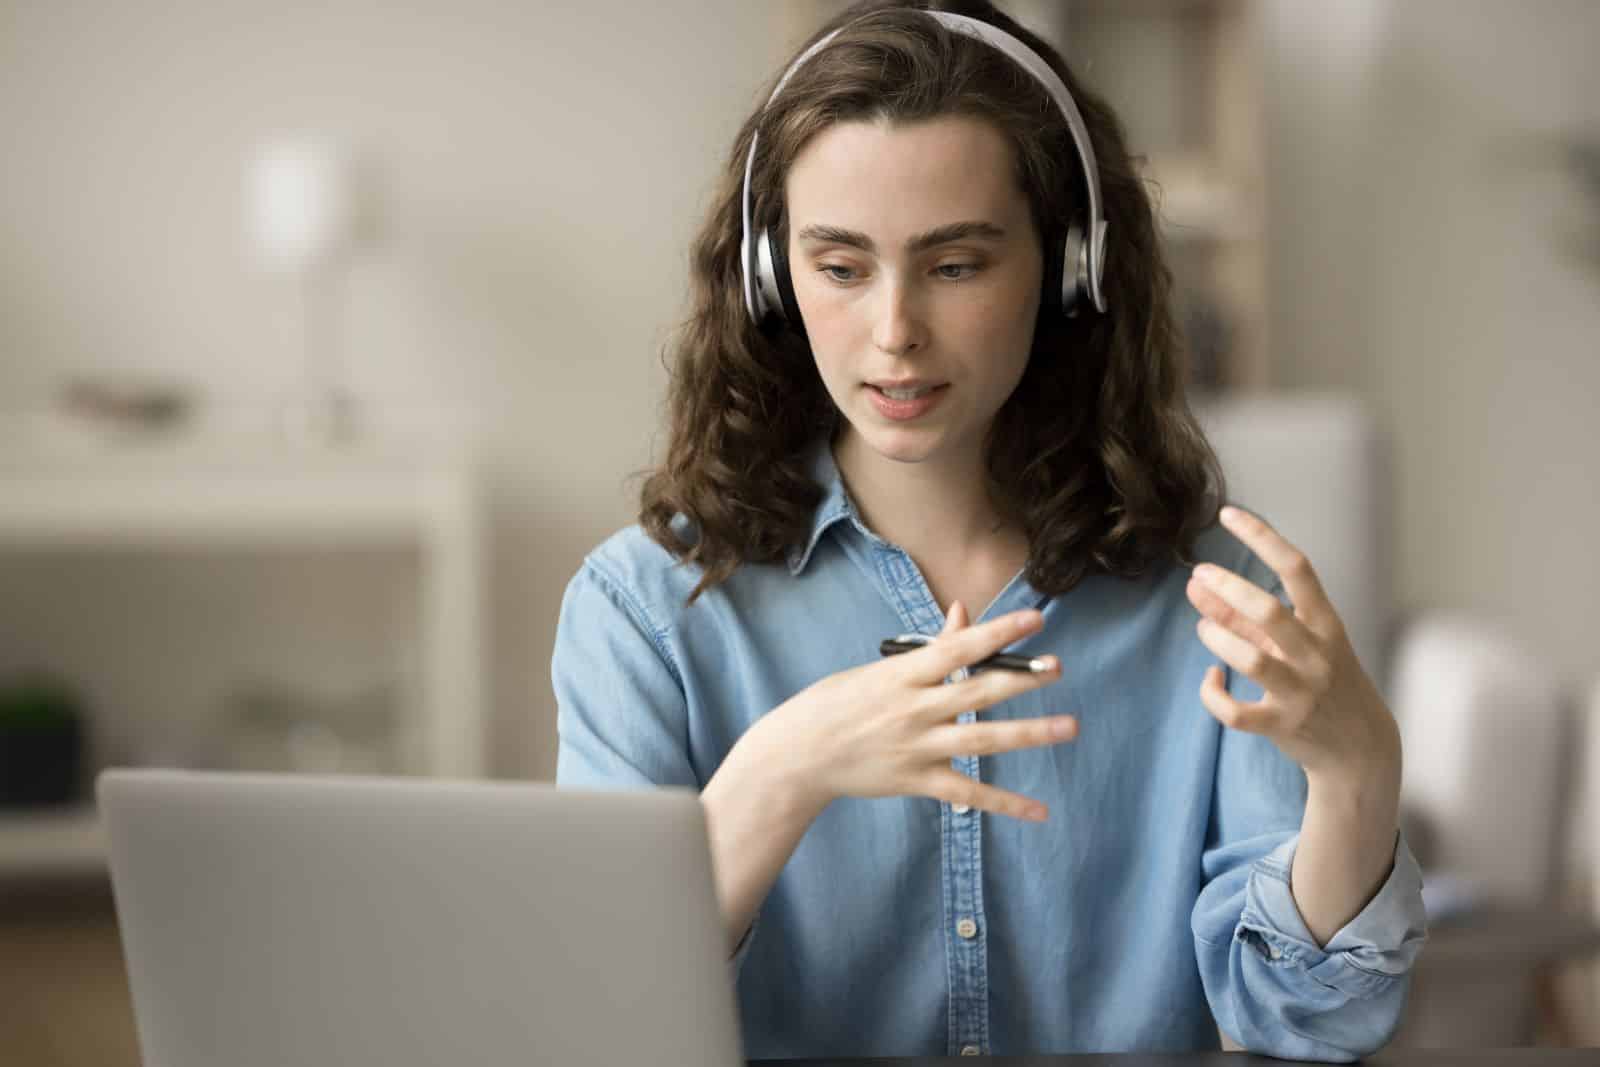 Image credit: Shutterstock / fizkes <p>For serious learners with more free time, Babbel could be a solid choice. This app focuses on conversation and pronunciation practice, so this option may be better for those with the space and time to commit to practice.</p>